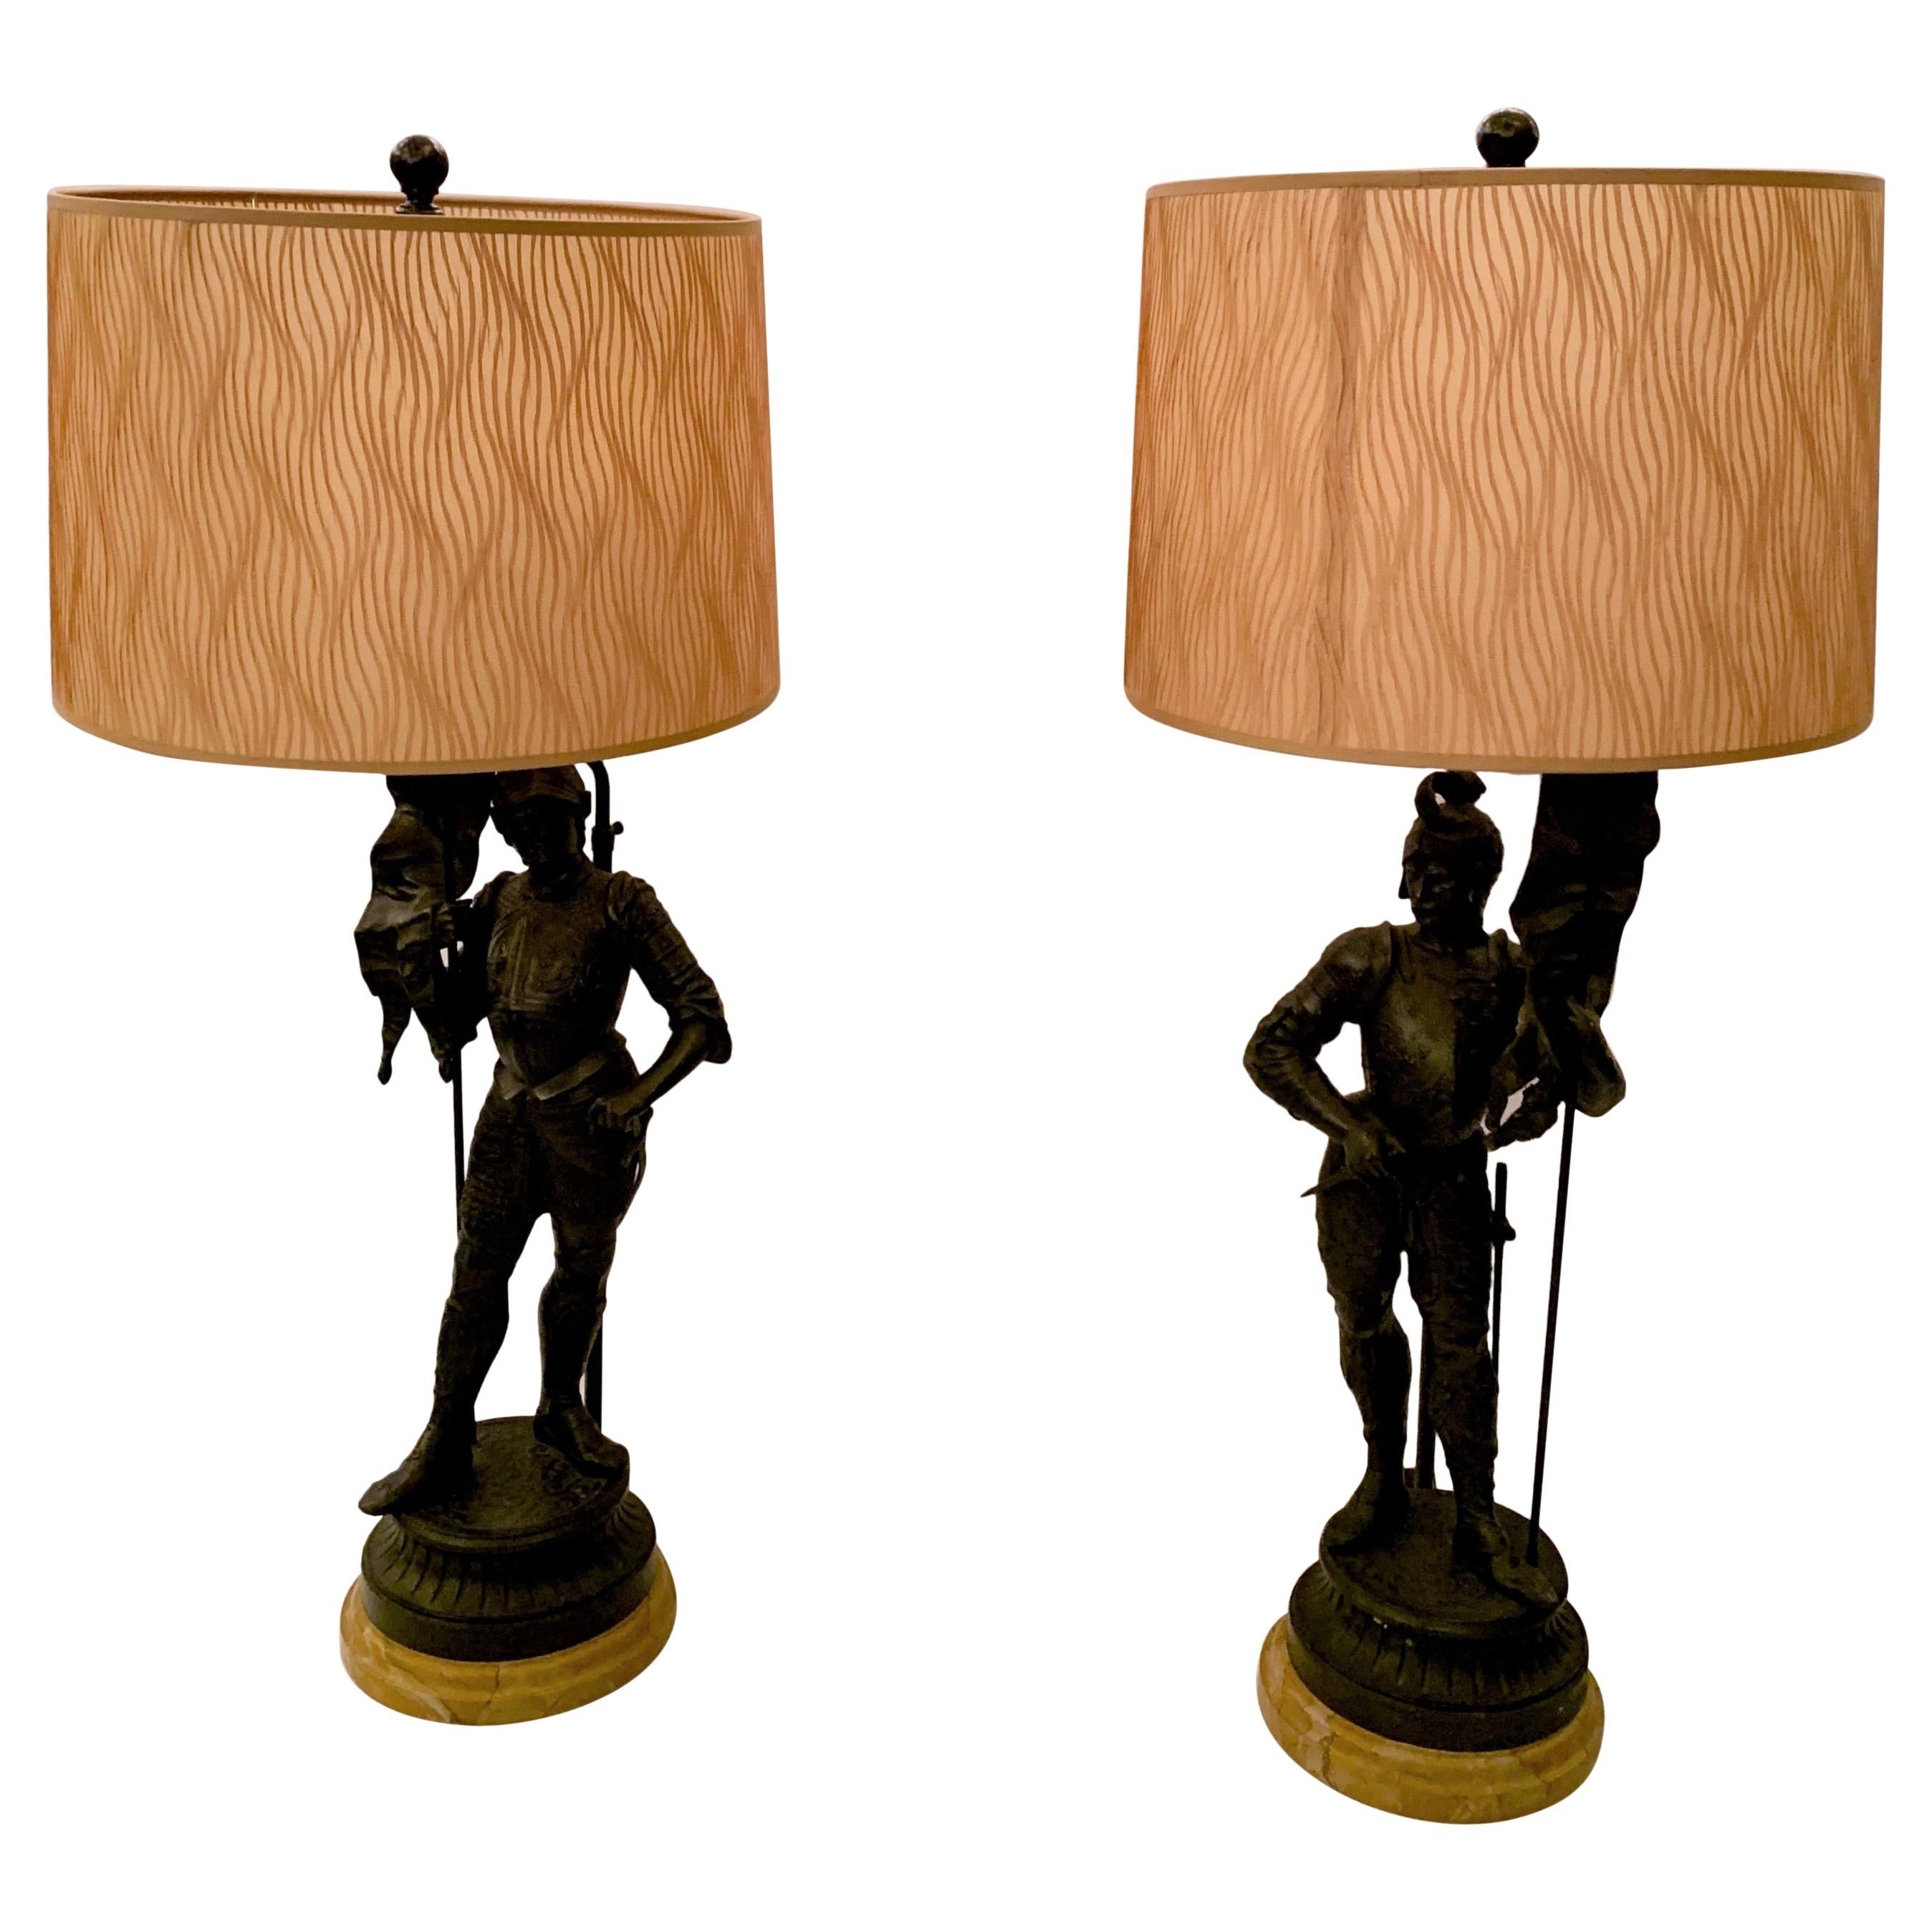 Pair Antique Spelter Metal "Conquistador" Lamps with New Shades, Circa 1900-1910